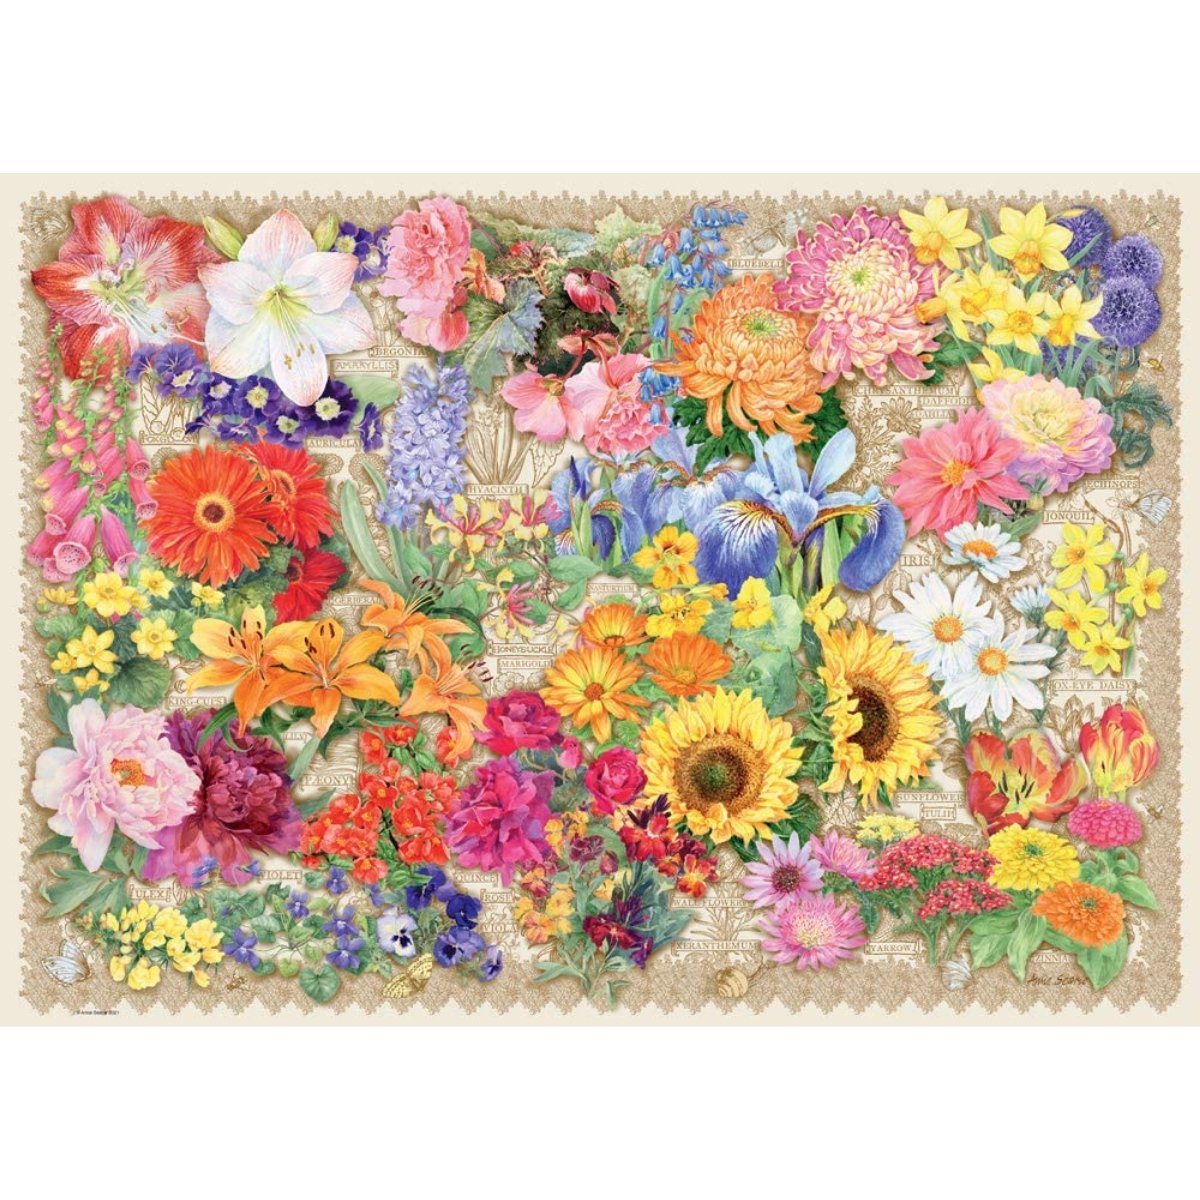 Ravensburger Blooming Beautiful 1000 Piece Jigsaw Puzzle - Phillips Hobbies